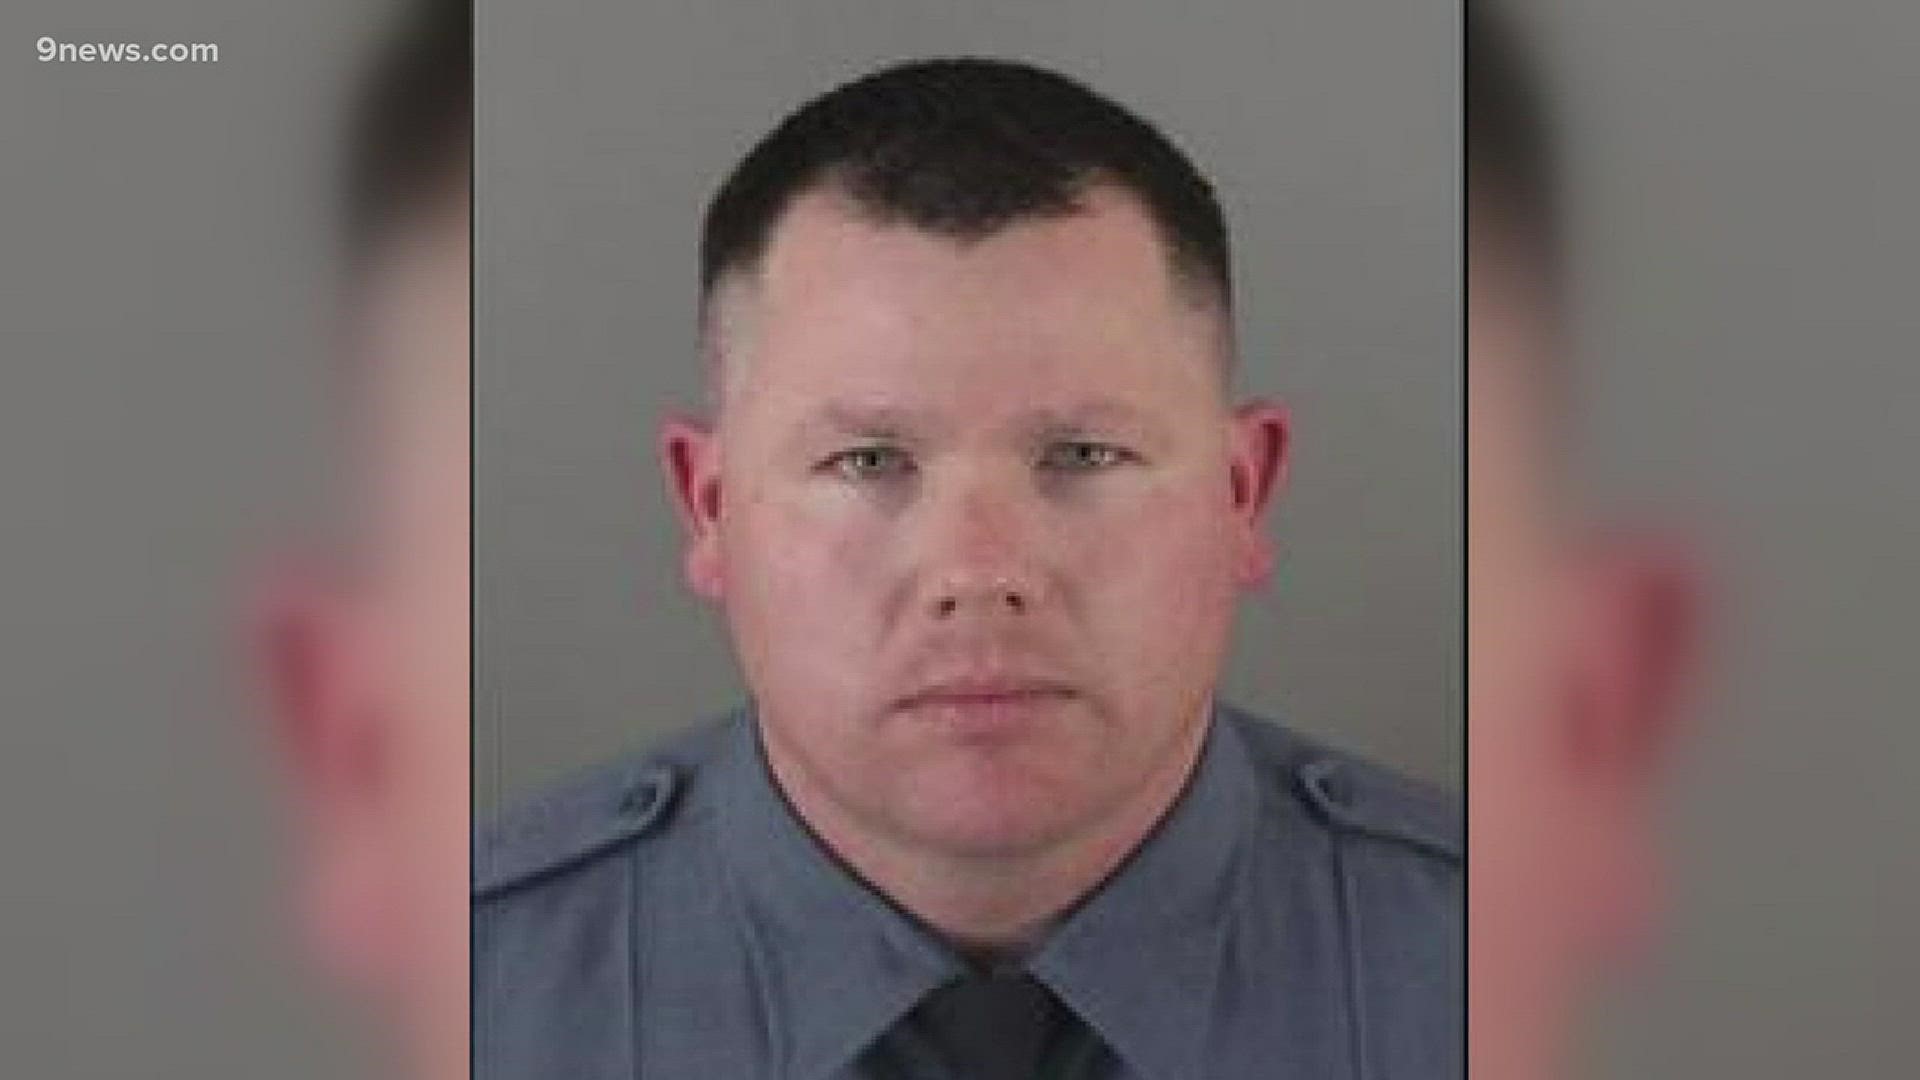 On Jan. 16, 2019 – just days after he celebrated his 41st birthday -- Adams County Deputy Jesse Jenson was shot by a law enforcement officer, according to a release from Greeley police.